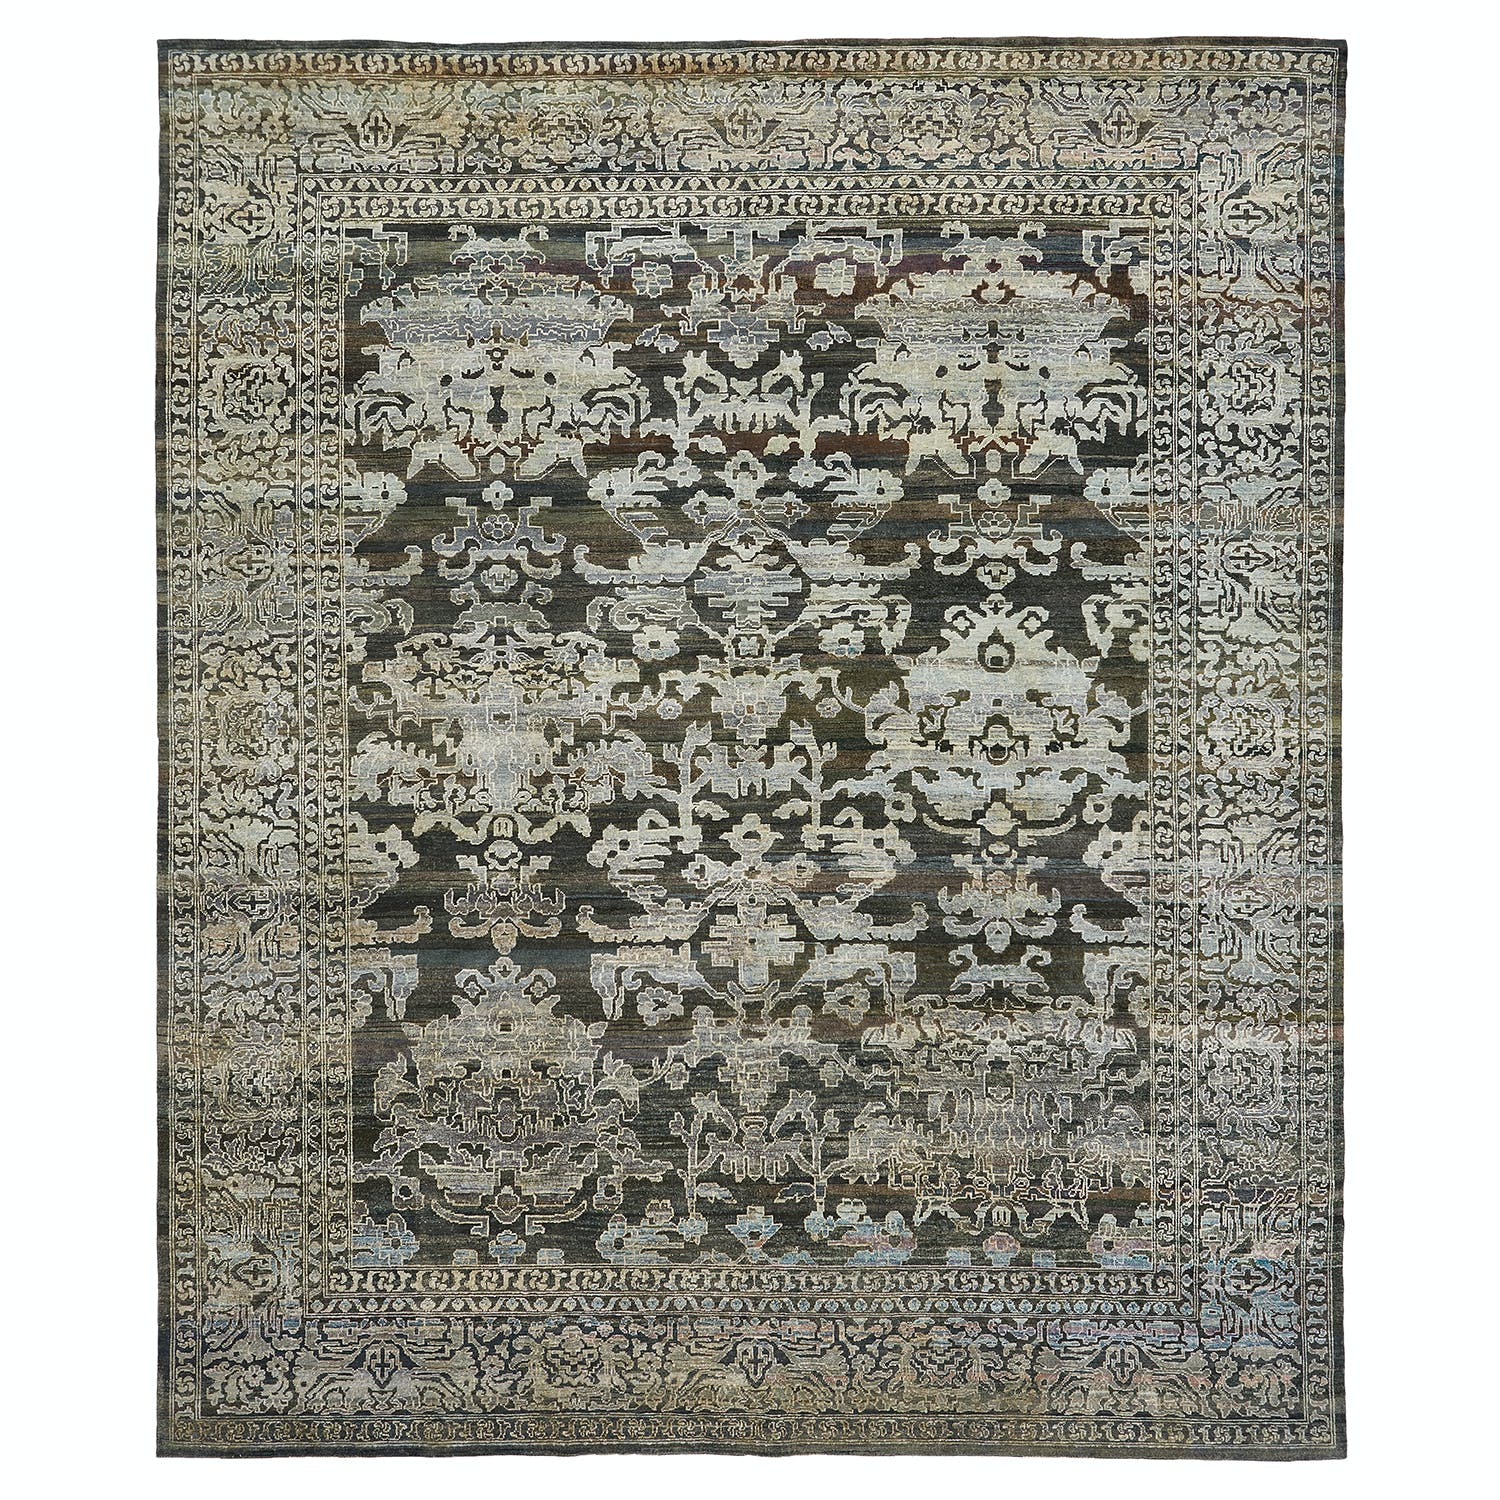 Intricate, symmetrical rug with floral motifs in muted colors.